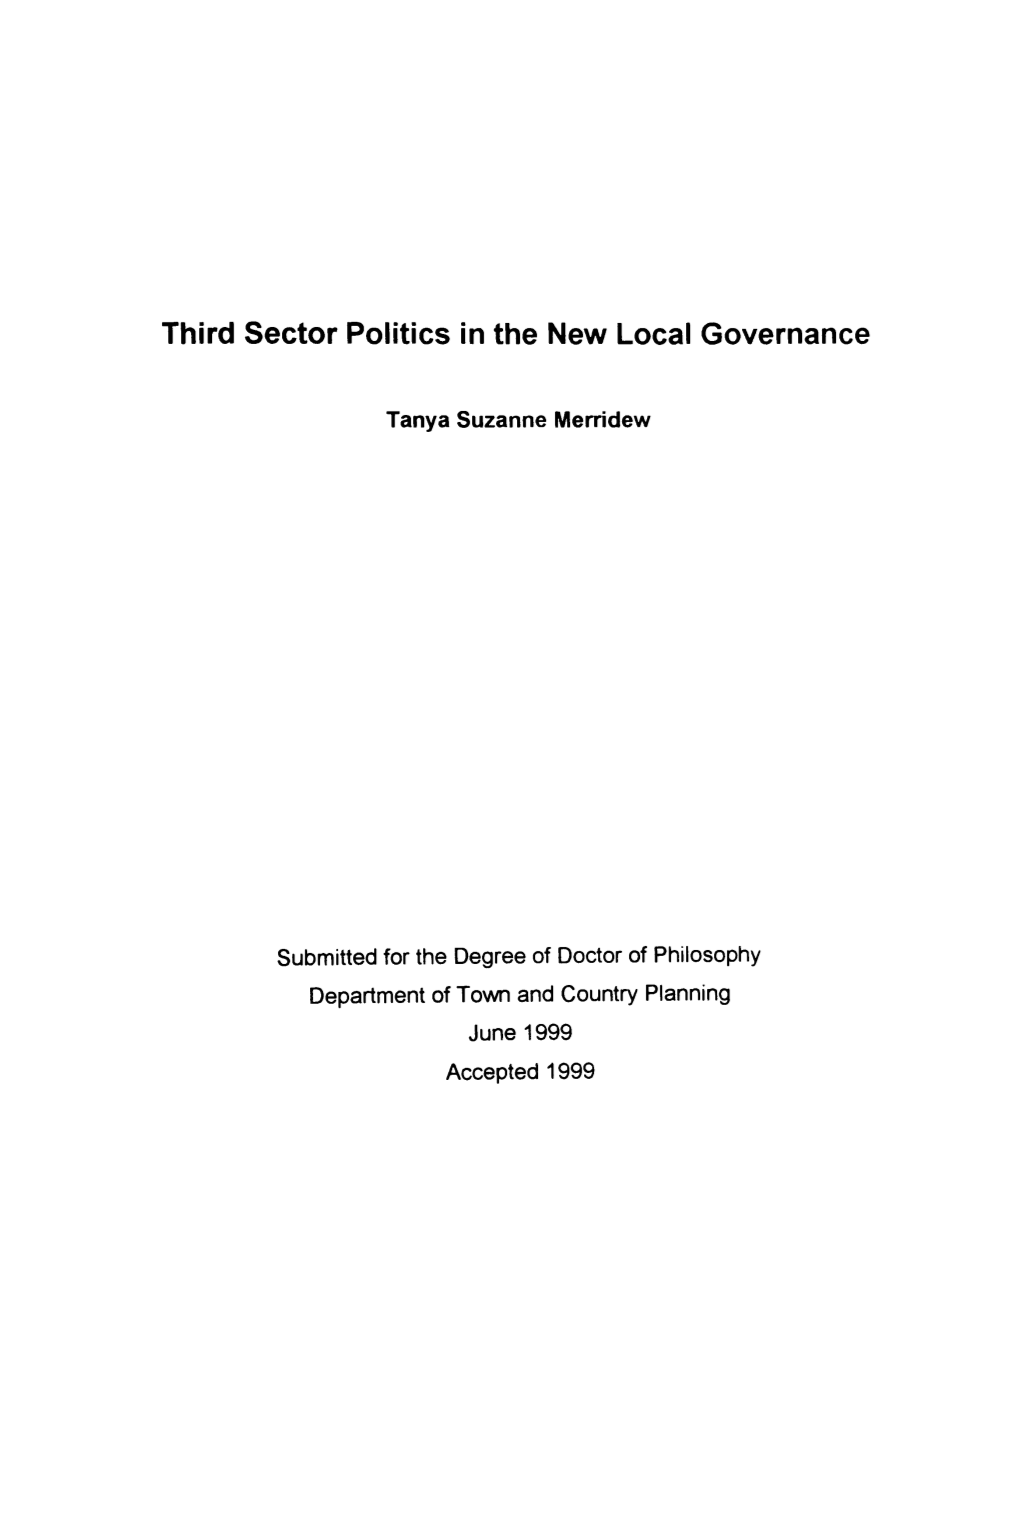 Third Sector Politics in the New Local Governance